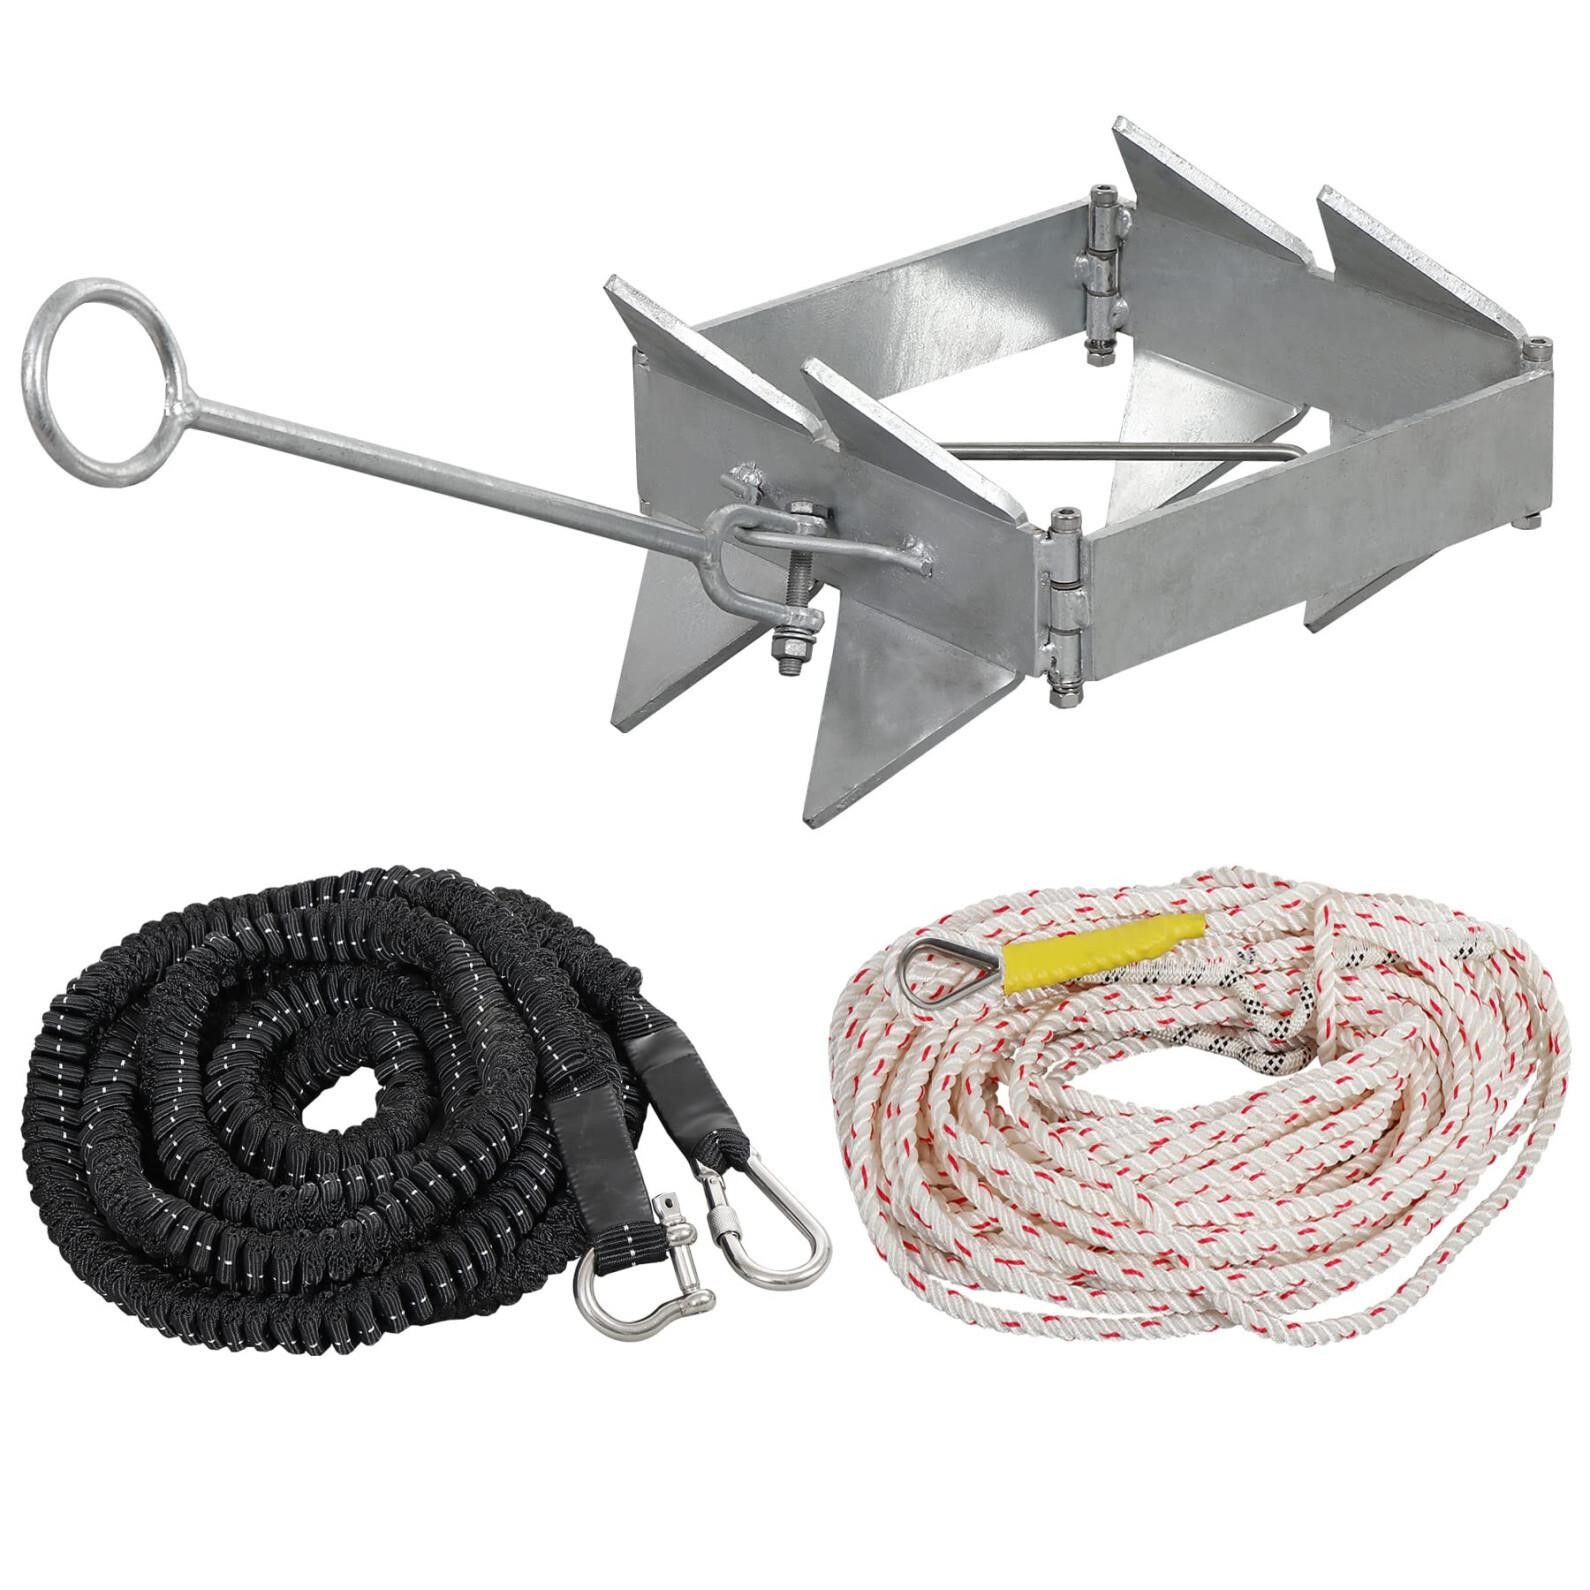 DorBuphan Boat Anchor 13LBS, Hot-Dipped Galvanized